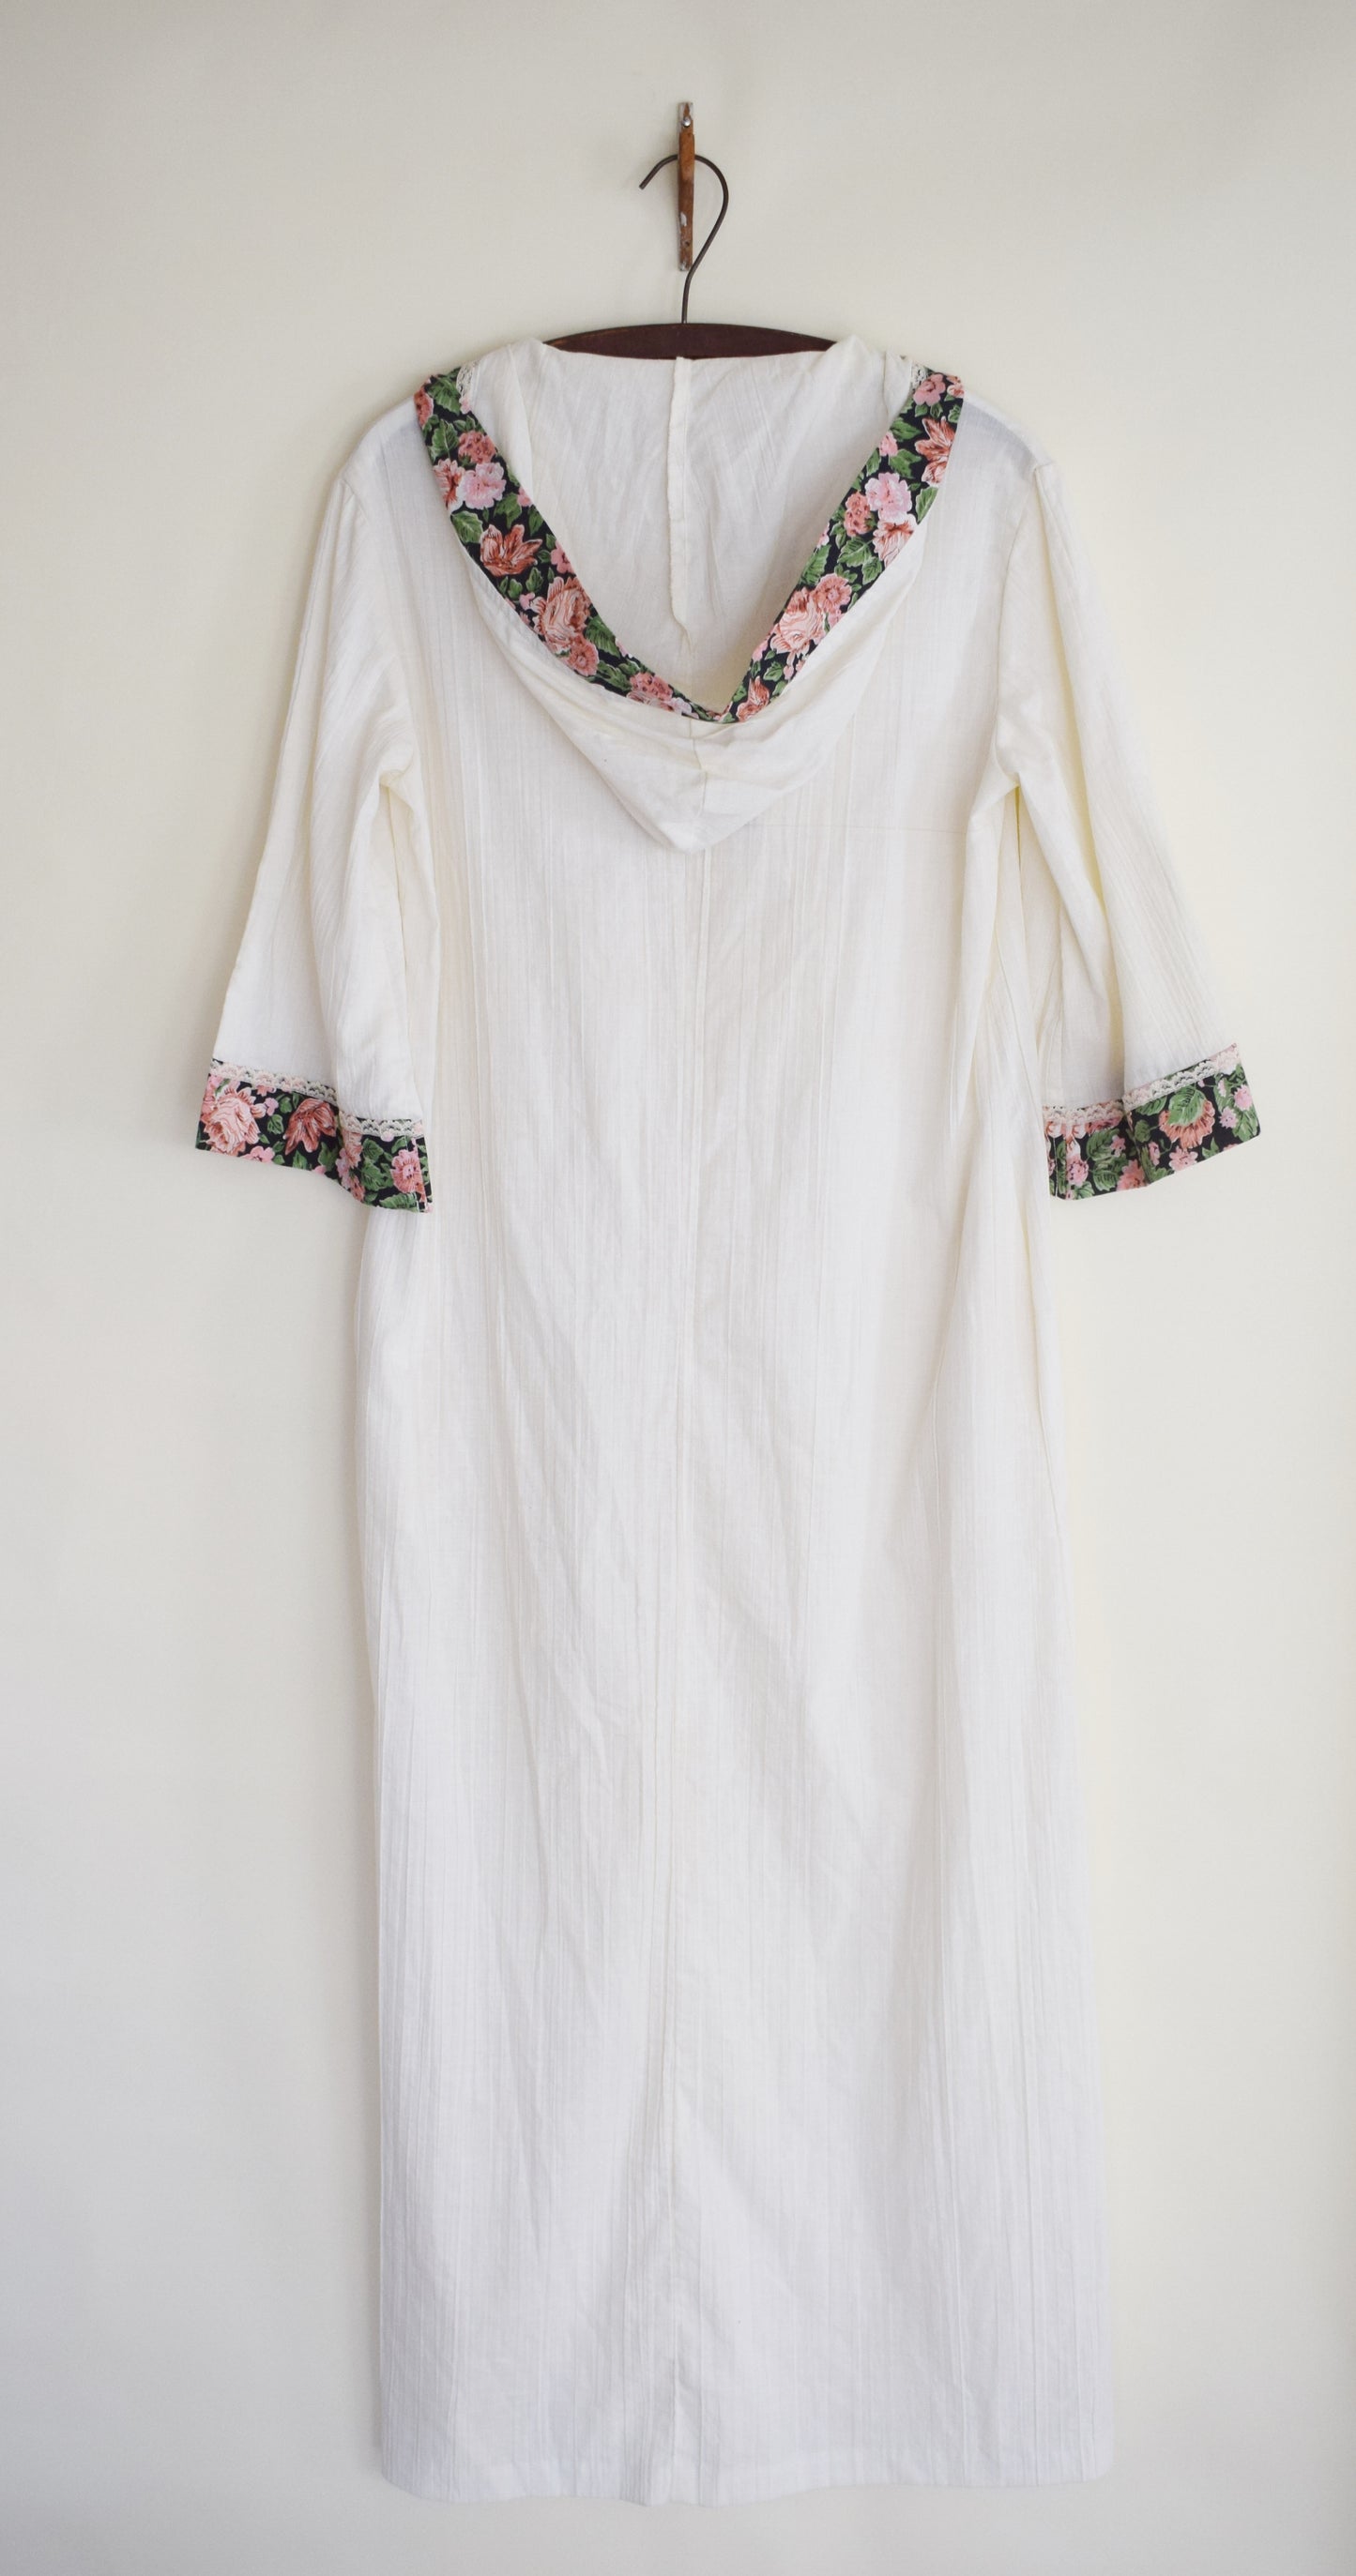 1970s/80s Hooded Cotton Dress